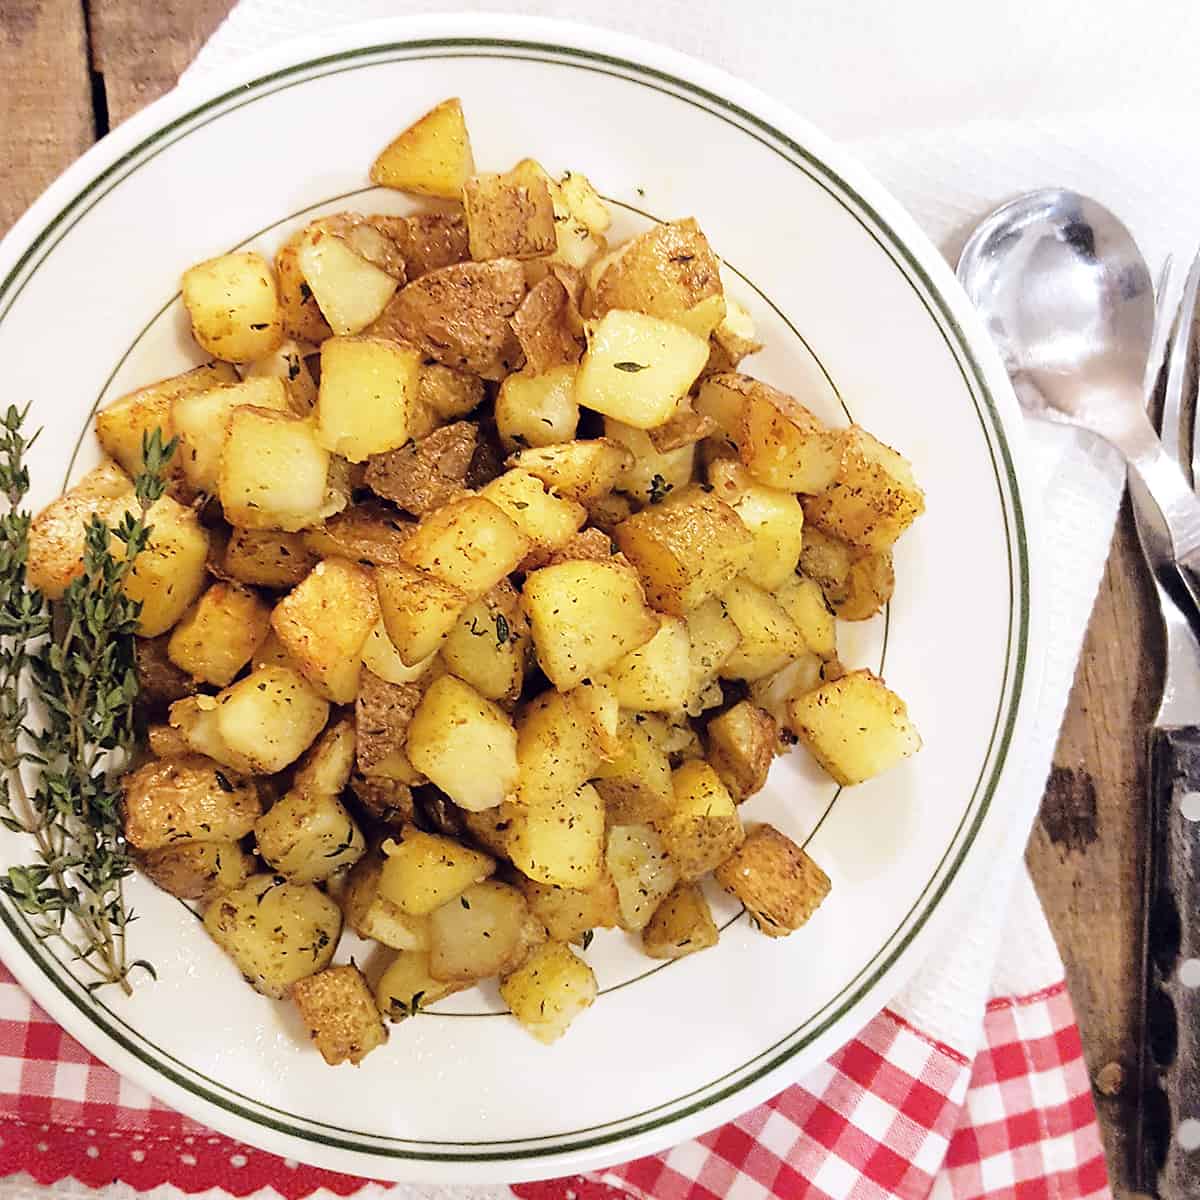 Home fries on a white plate with a kitchen towel and spoon in the background.